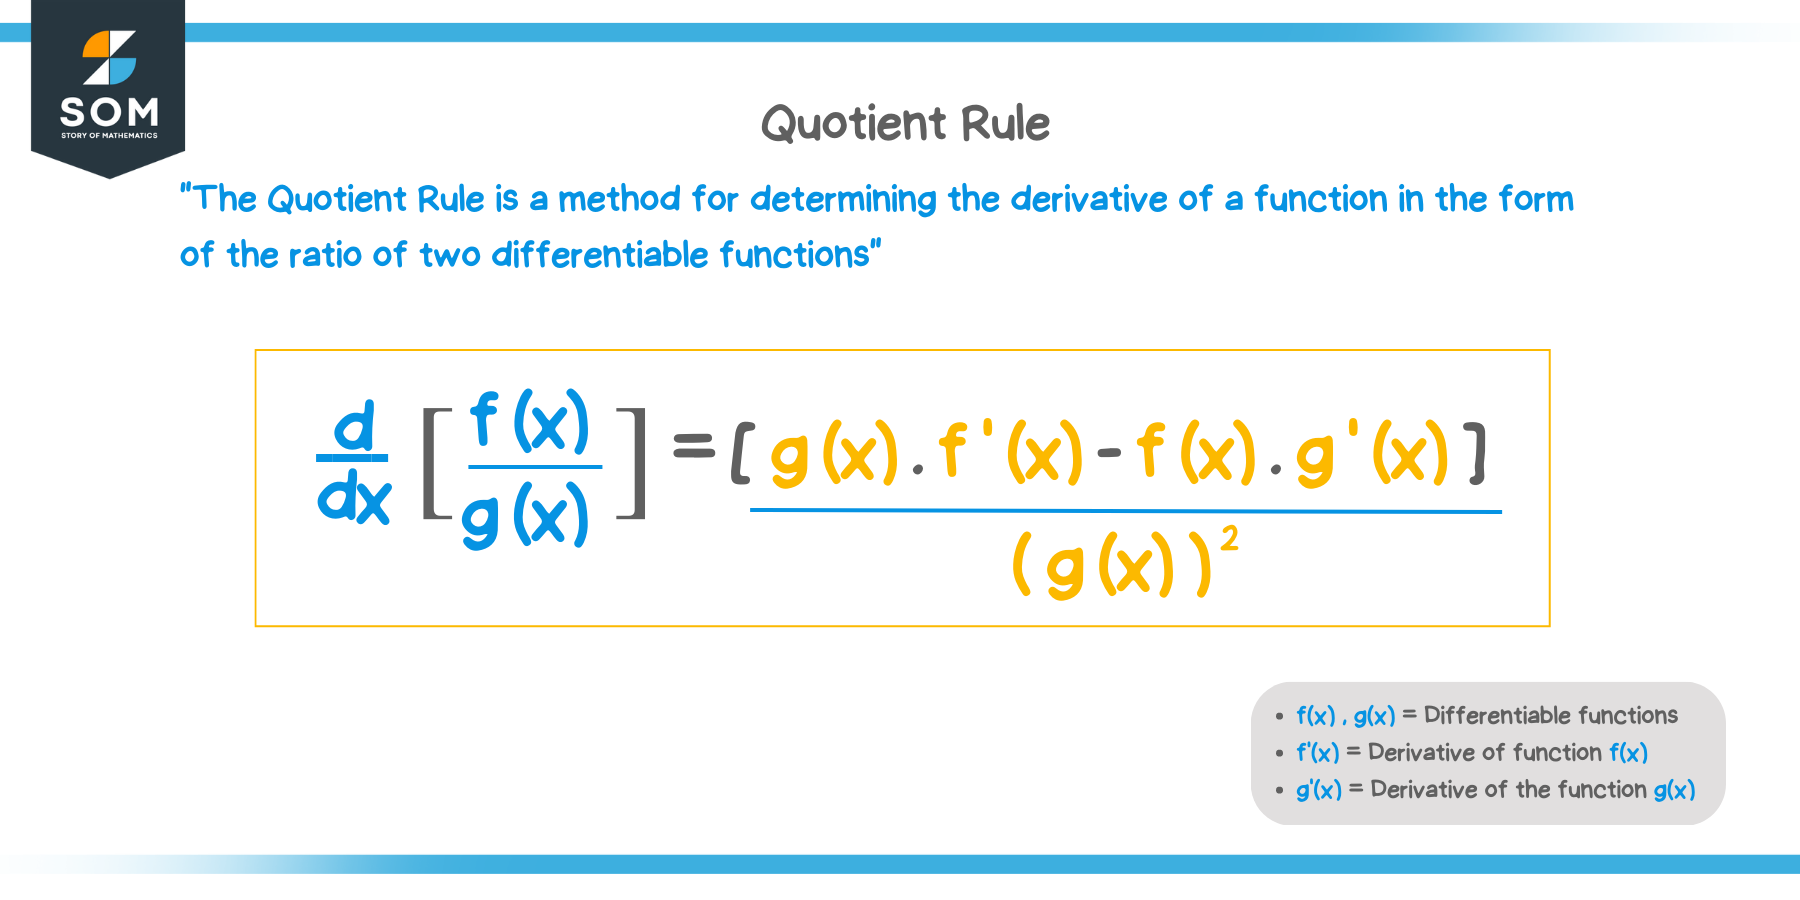 What is the formula for the quotient rule derivative?